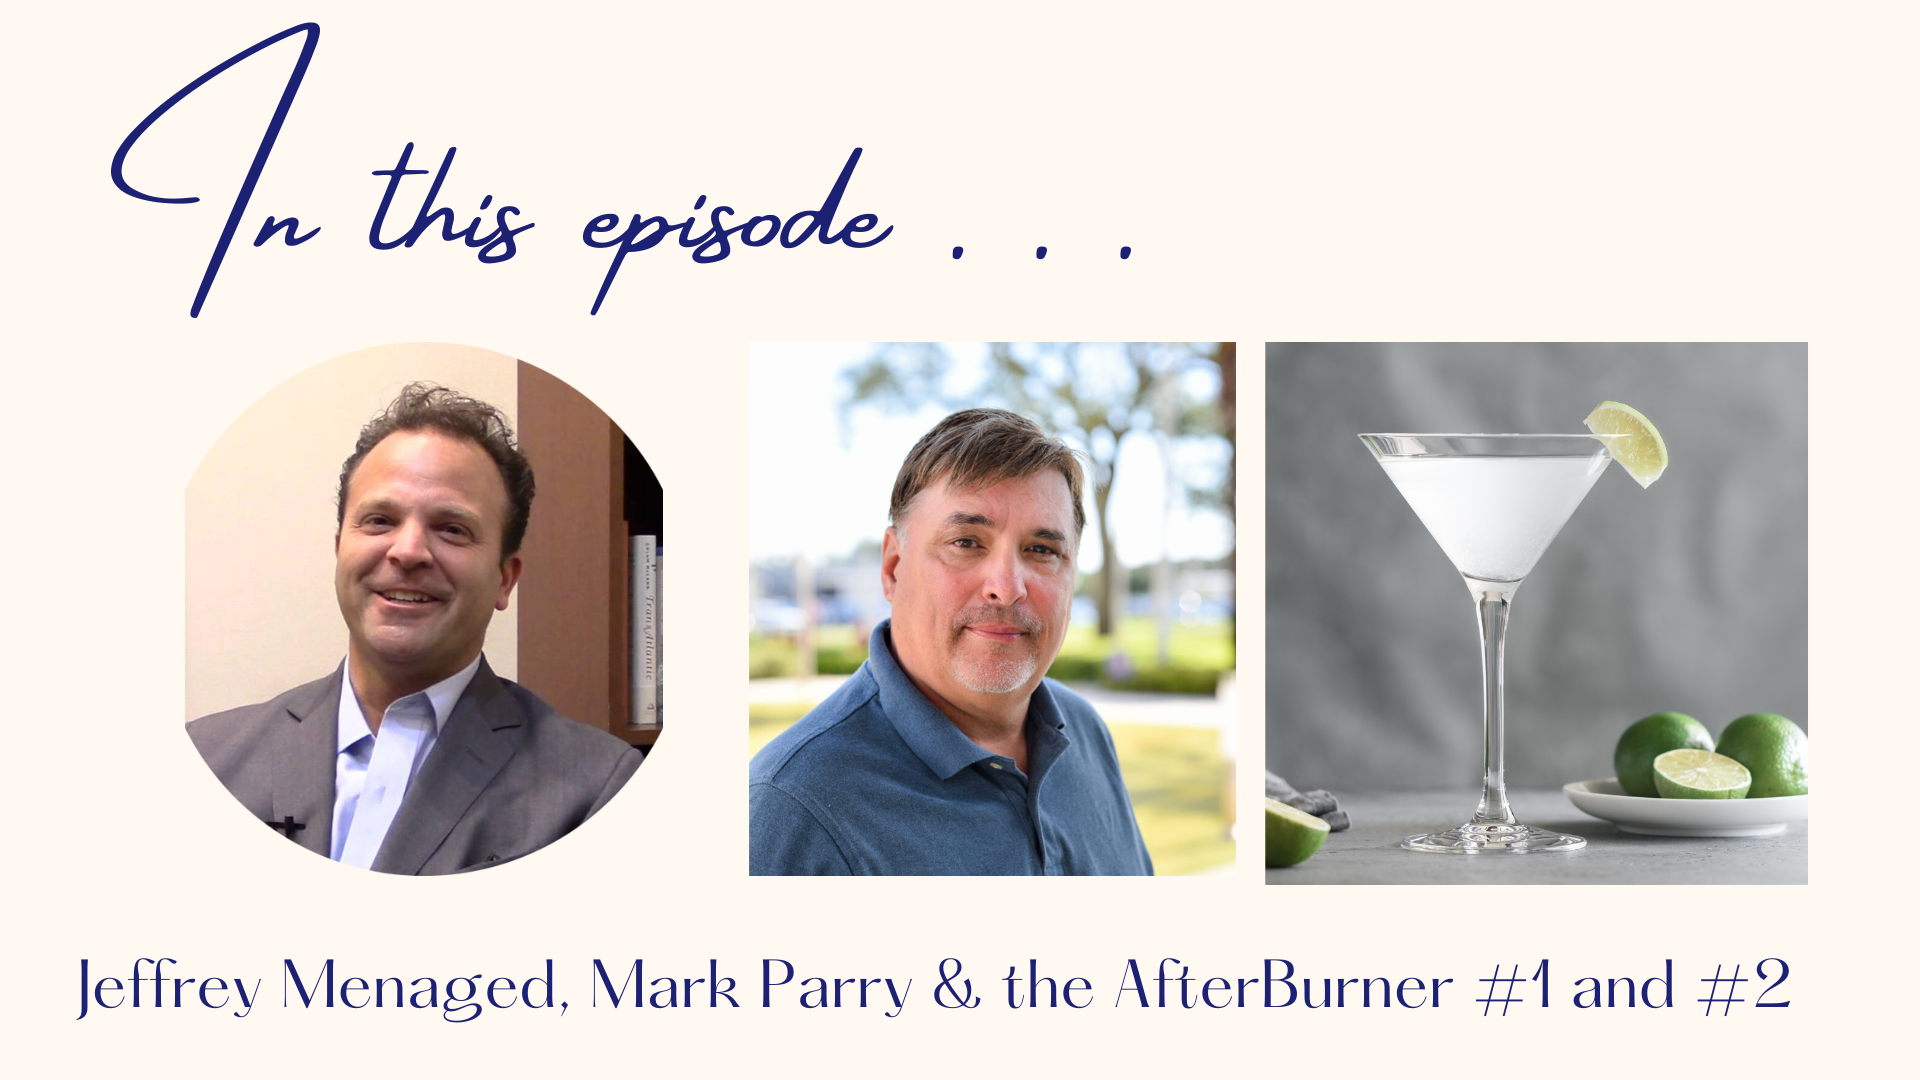 Mark Parry, Jeffrey Menaged and the Afterburner #1 and #2